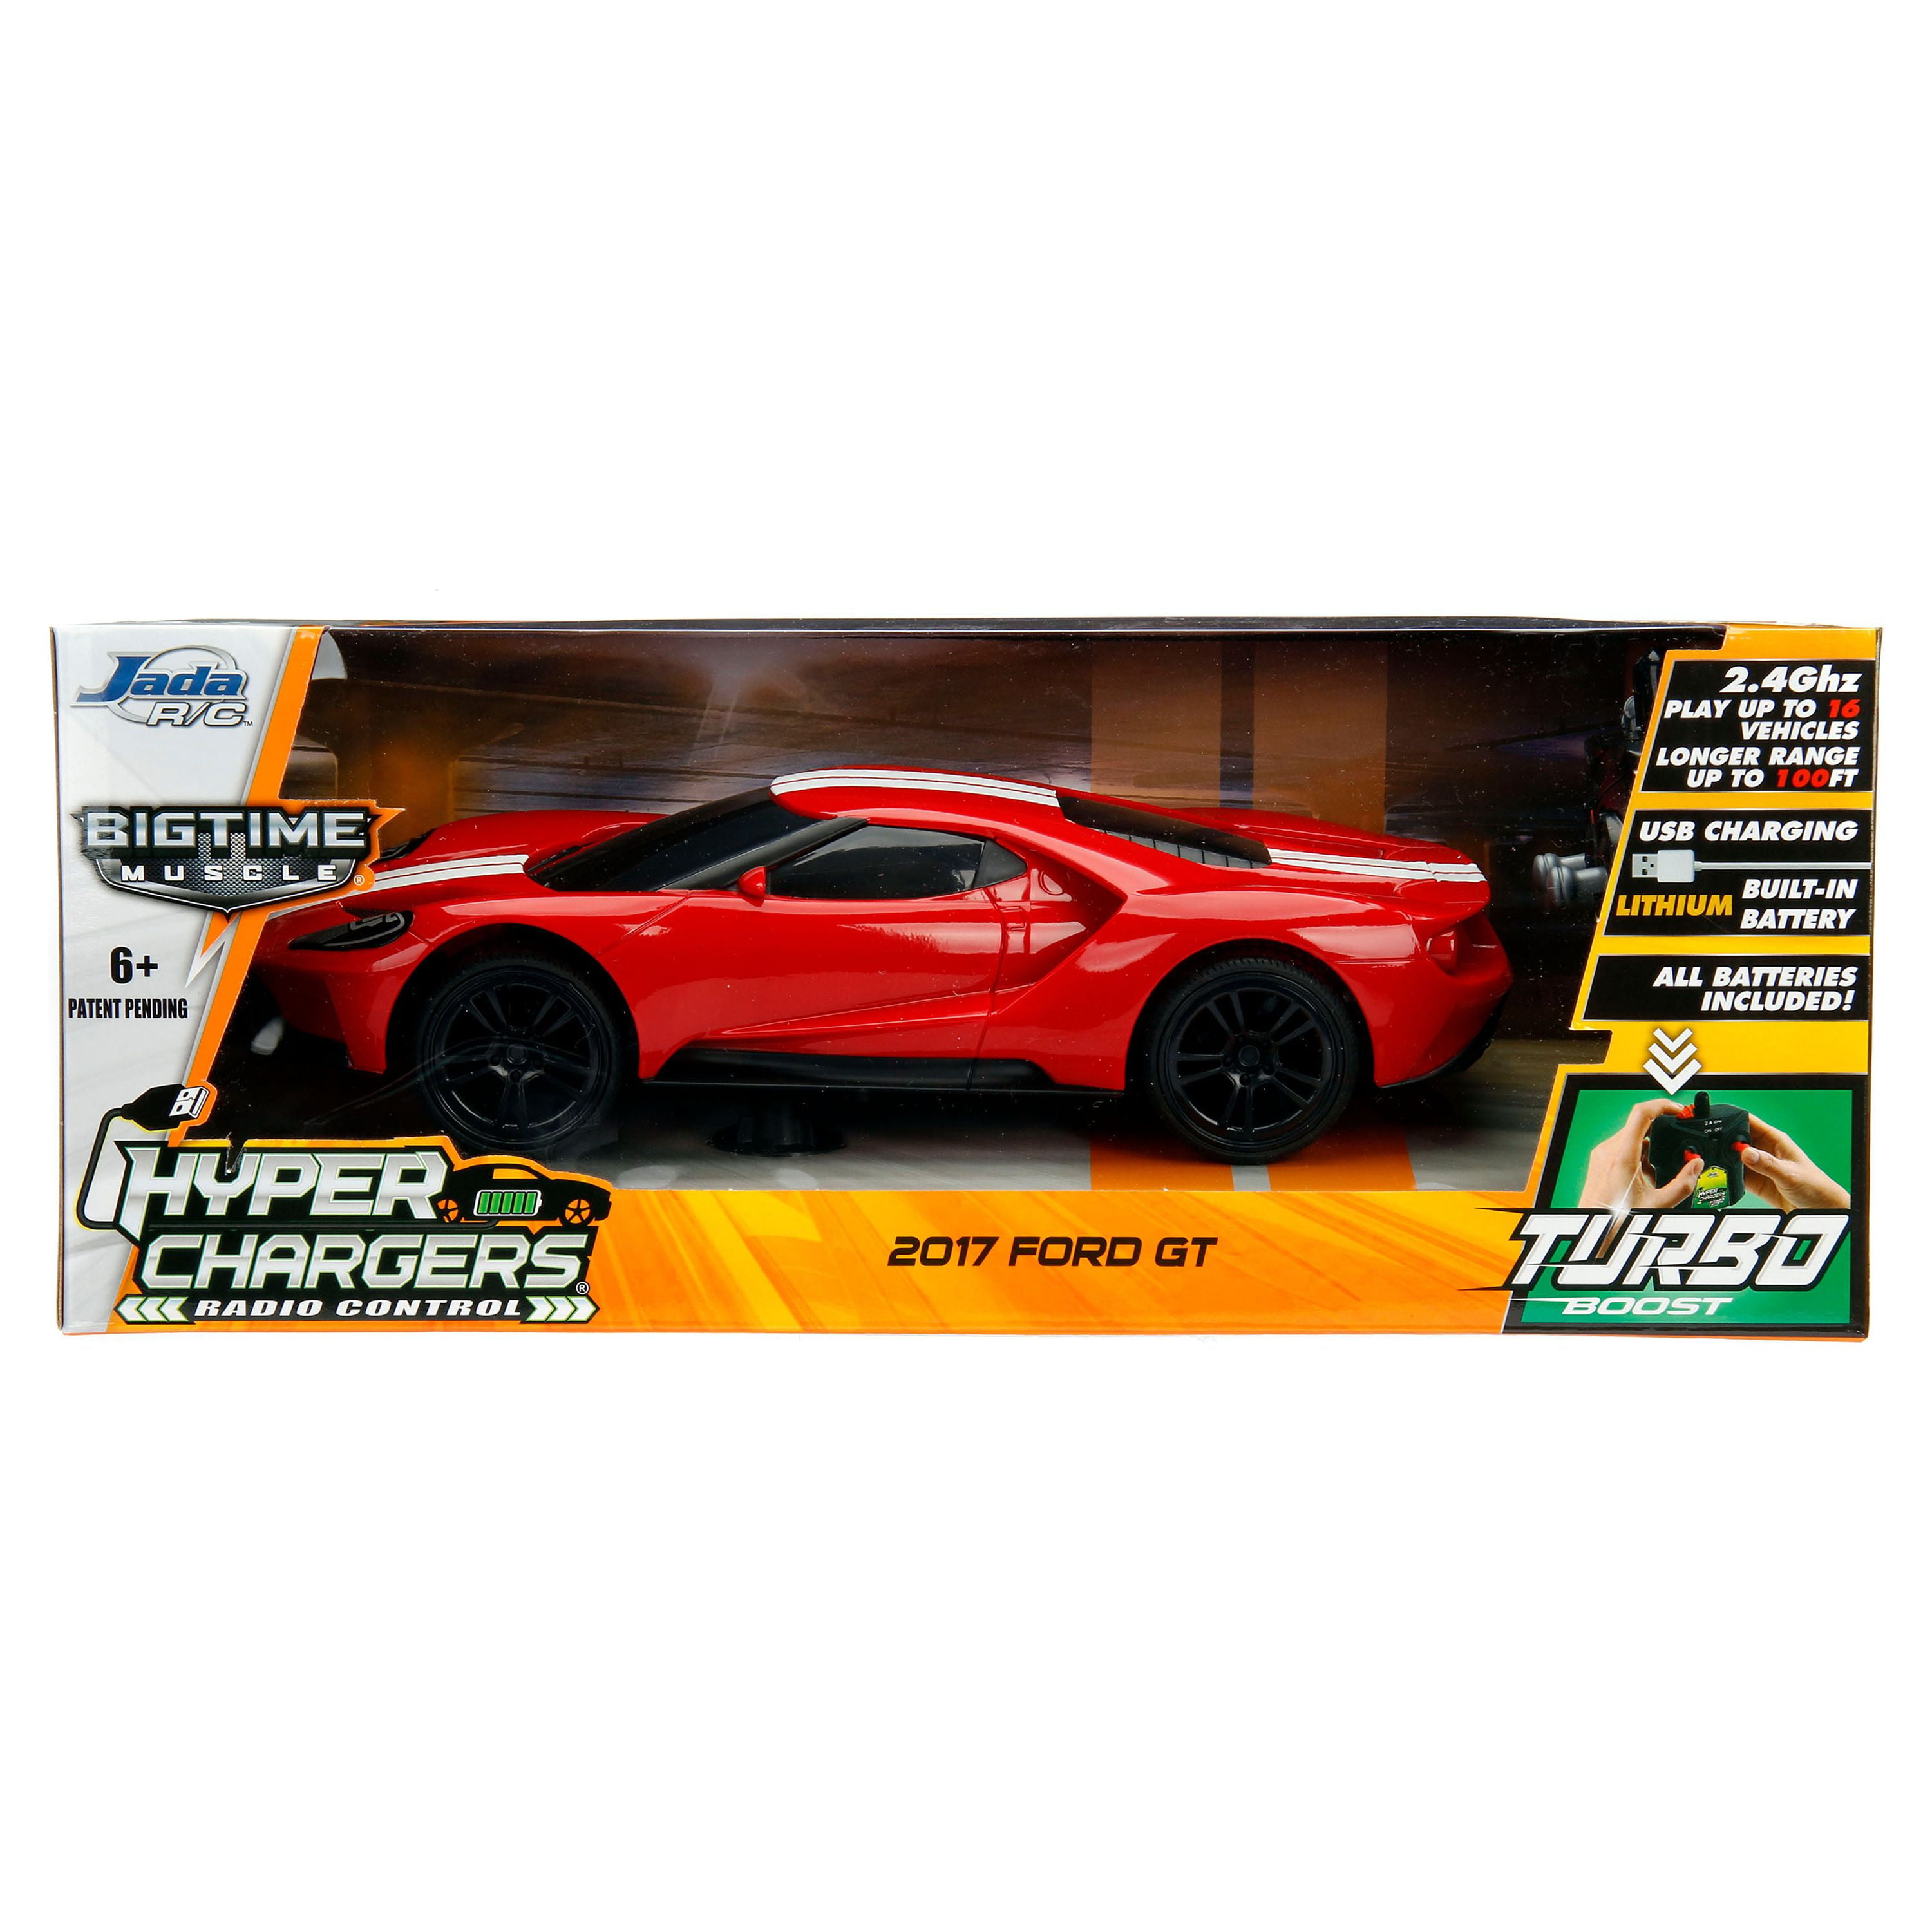 Jada Toys - Hyperchargers 1:16 Big Time Muscle RC, 2017 Ford GT 